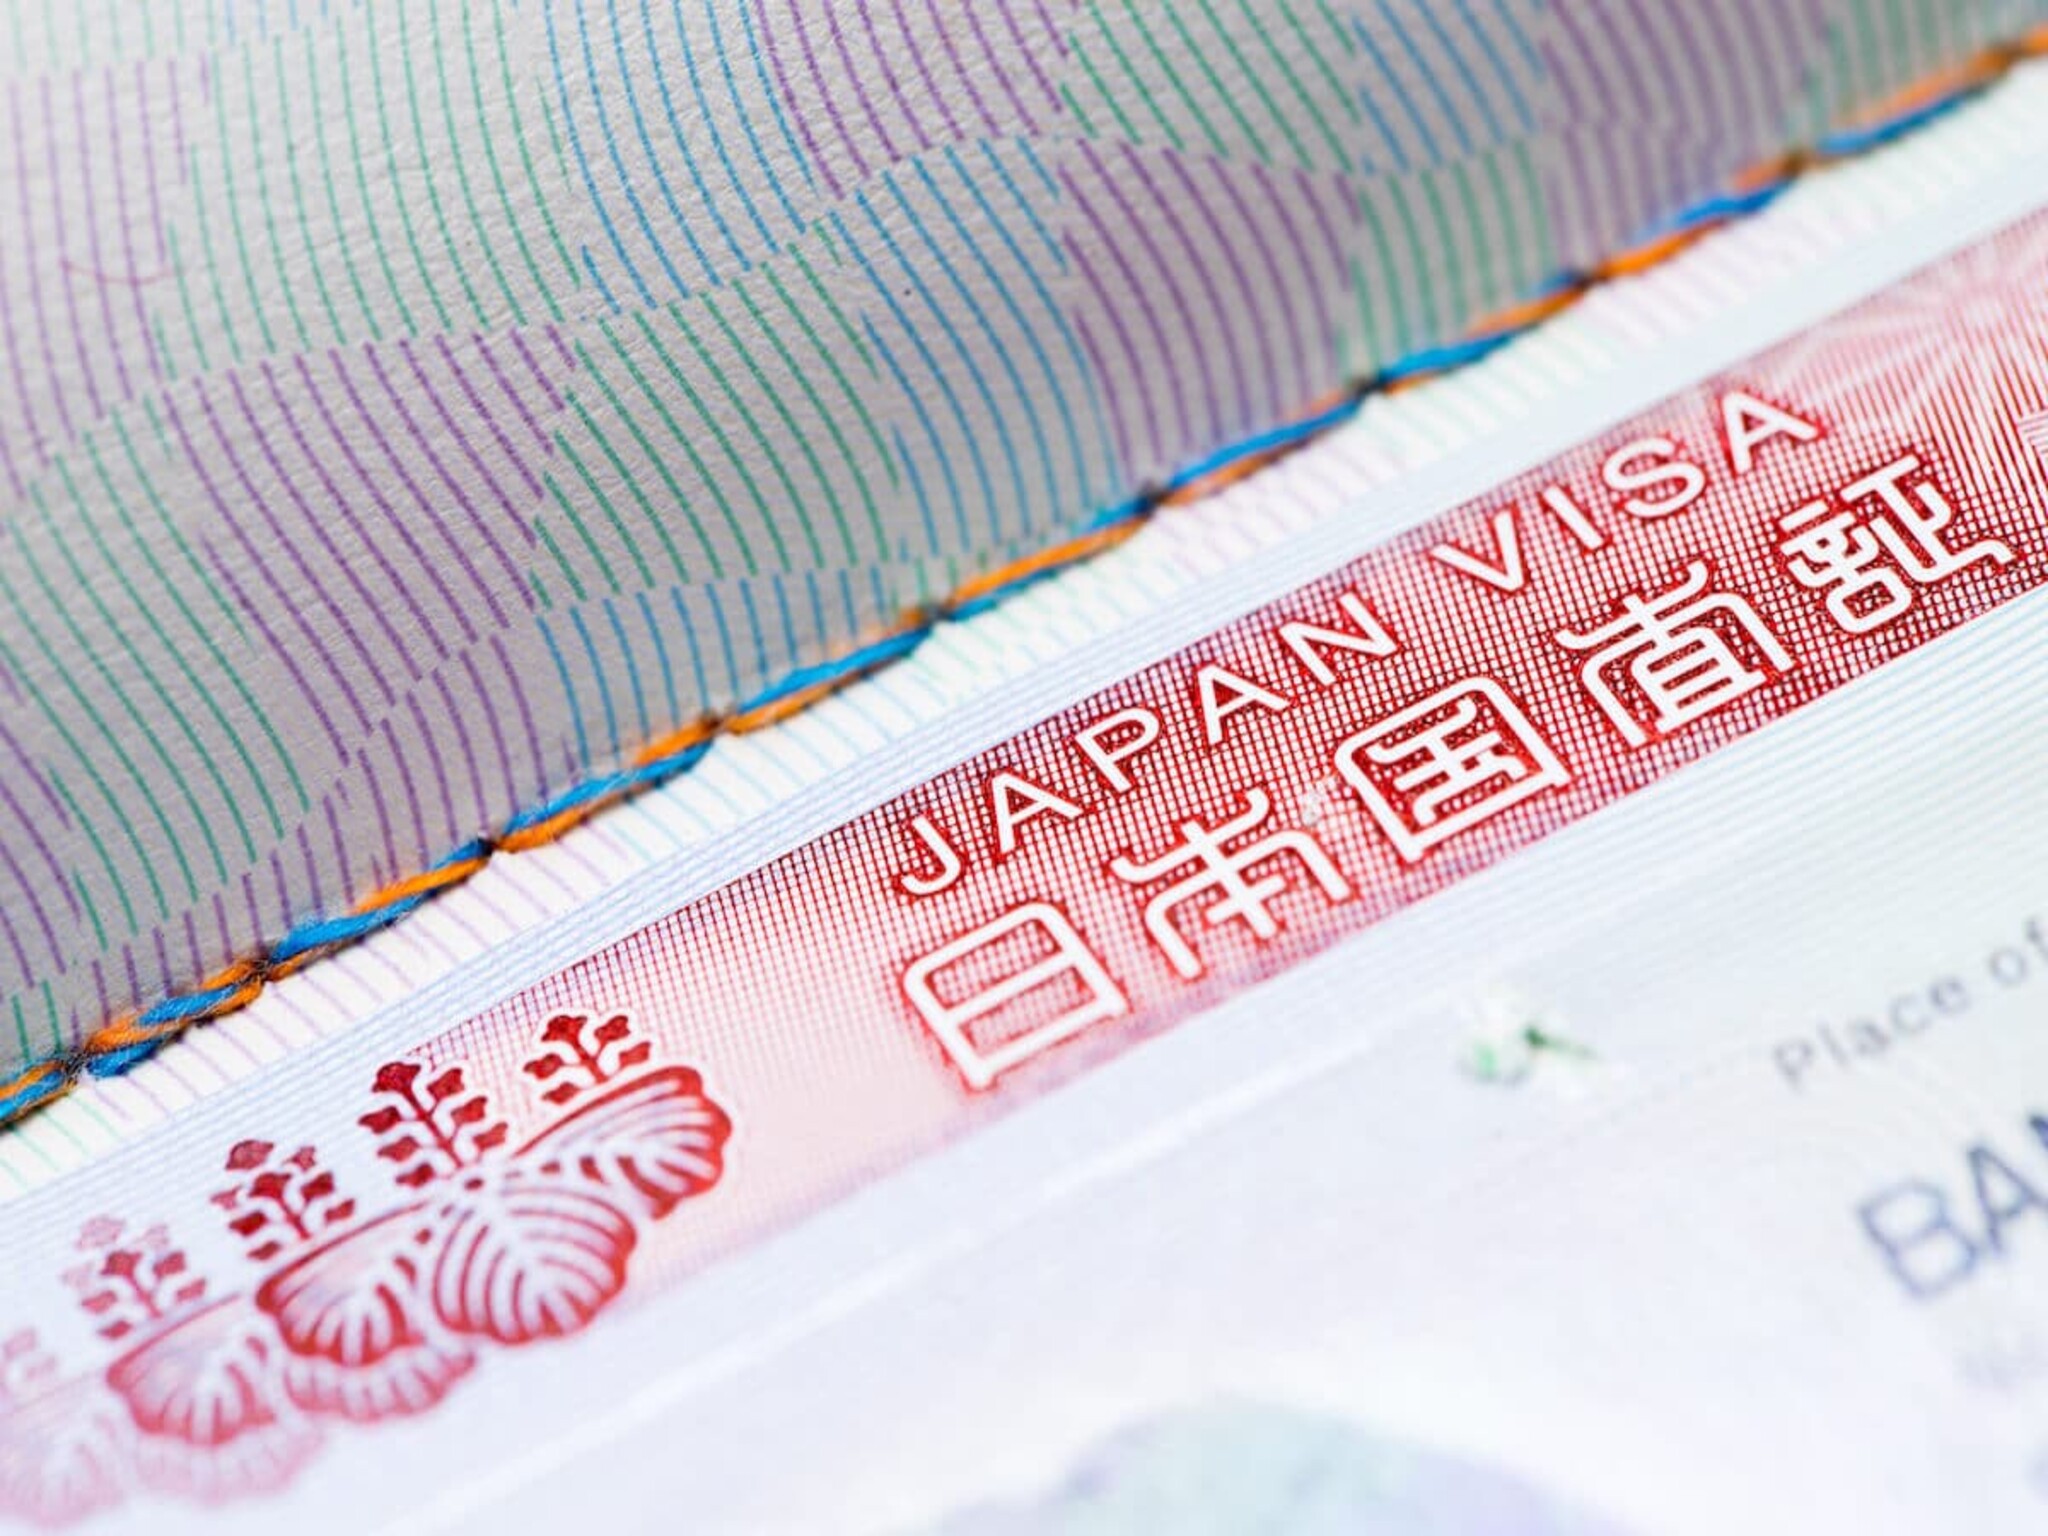 How to obtain a Japanese e-Visa during Japan's suspension of service